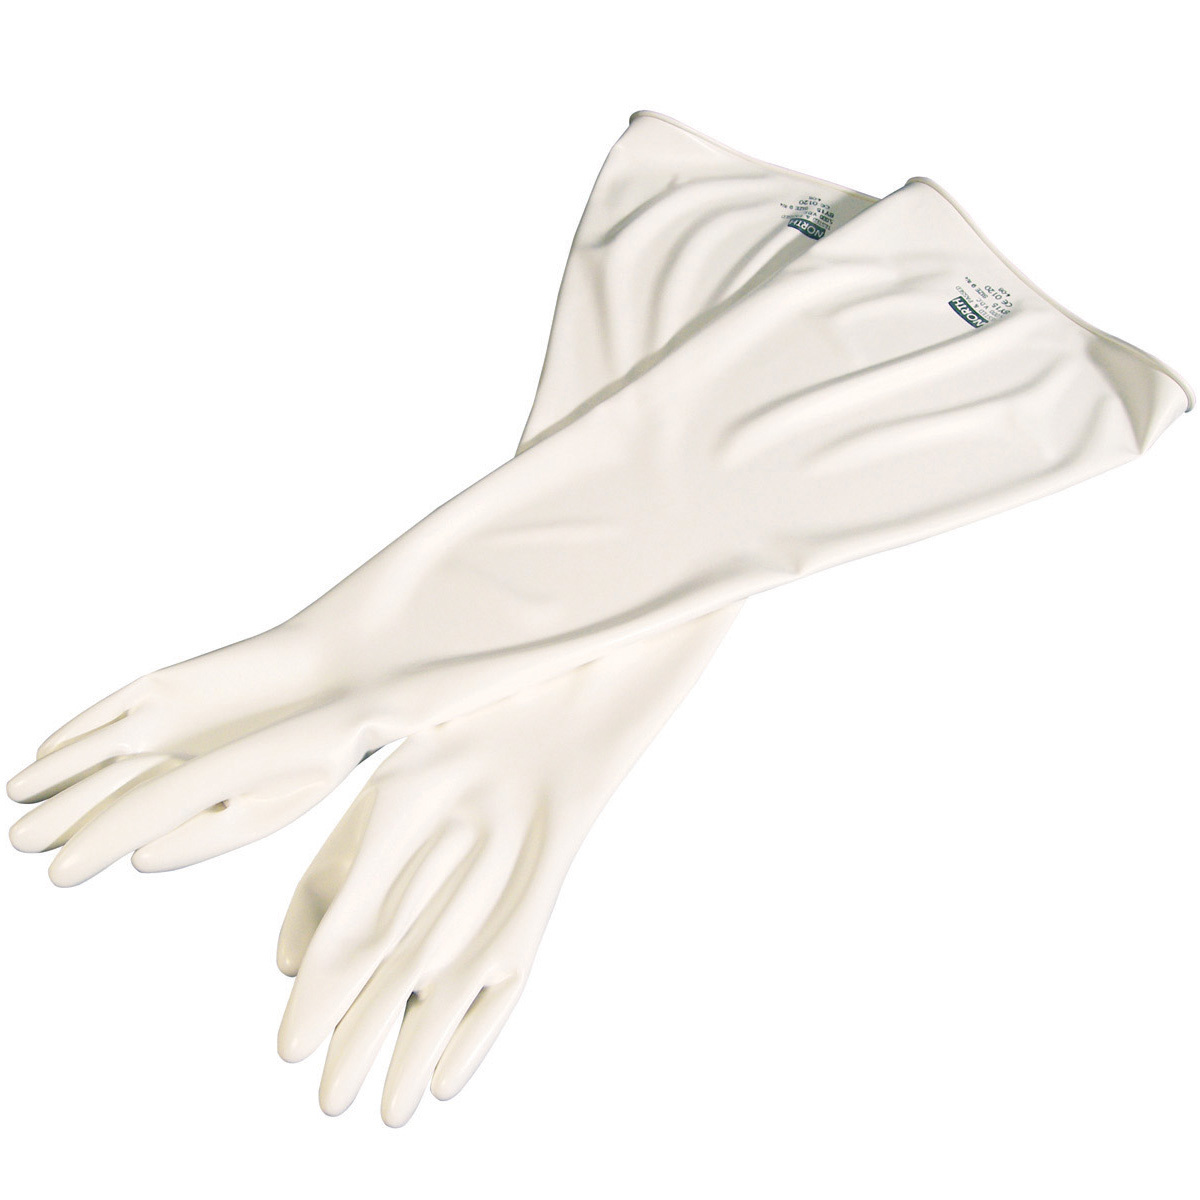 Honeywell Size 9 3/4 White Glovebox 15 mil Unsupported Chlorosulfonated Polyethylene And Hypalon® Chemical Resistant Gloves